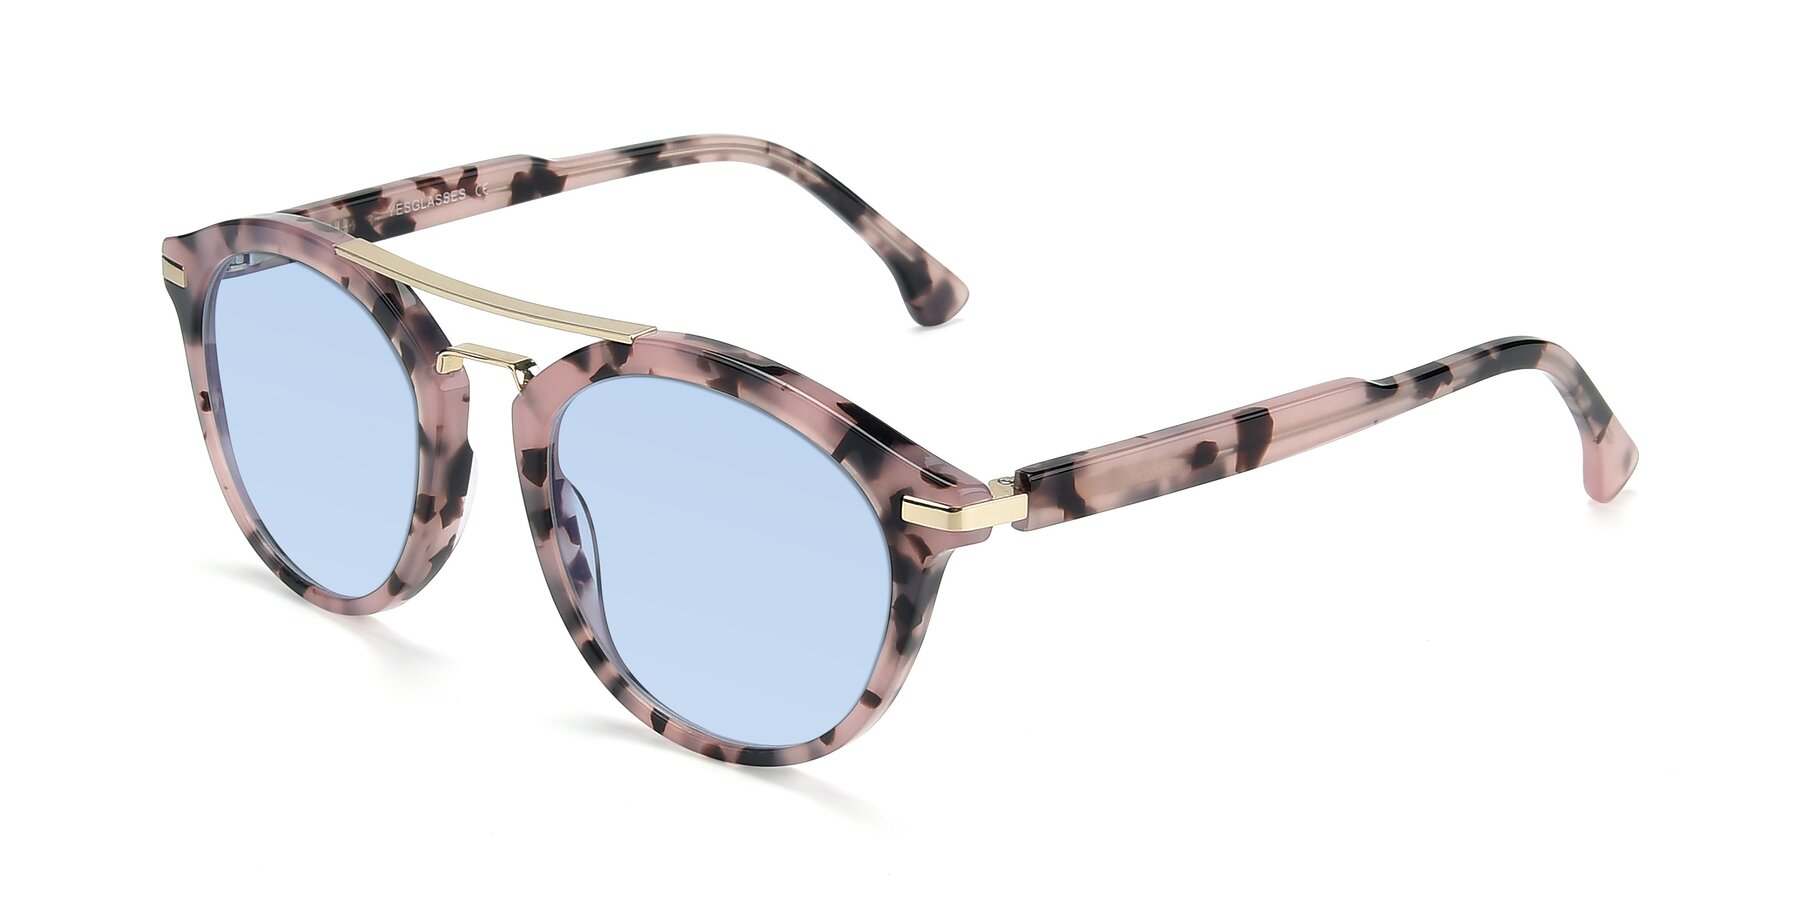 Angle of 17236 in Havana Floral-Gold with Light Blue Tinted Lenses